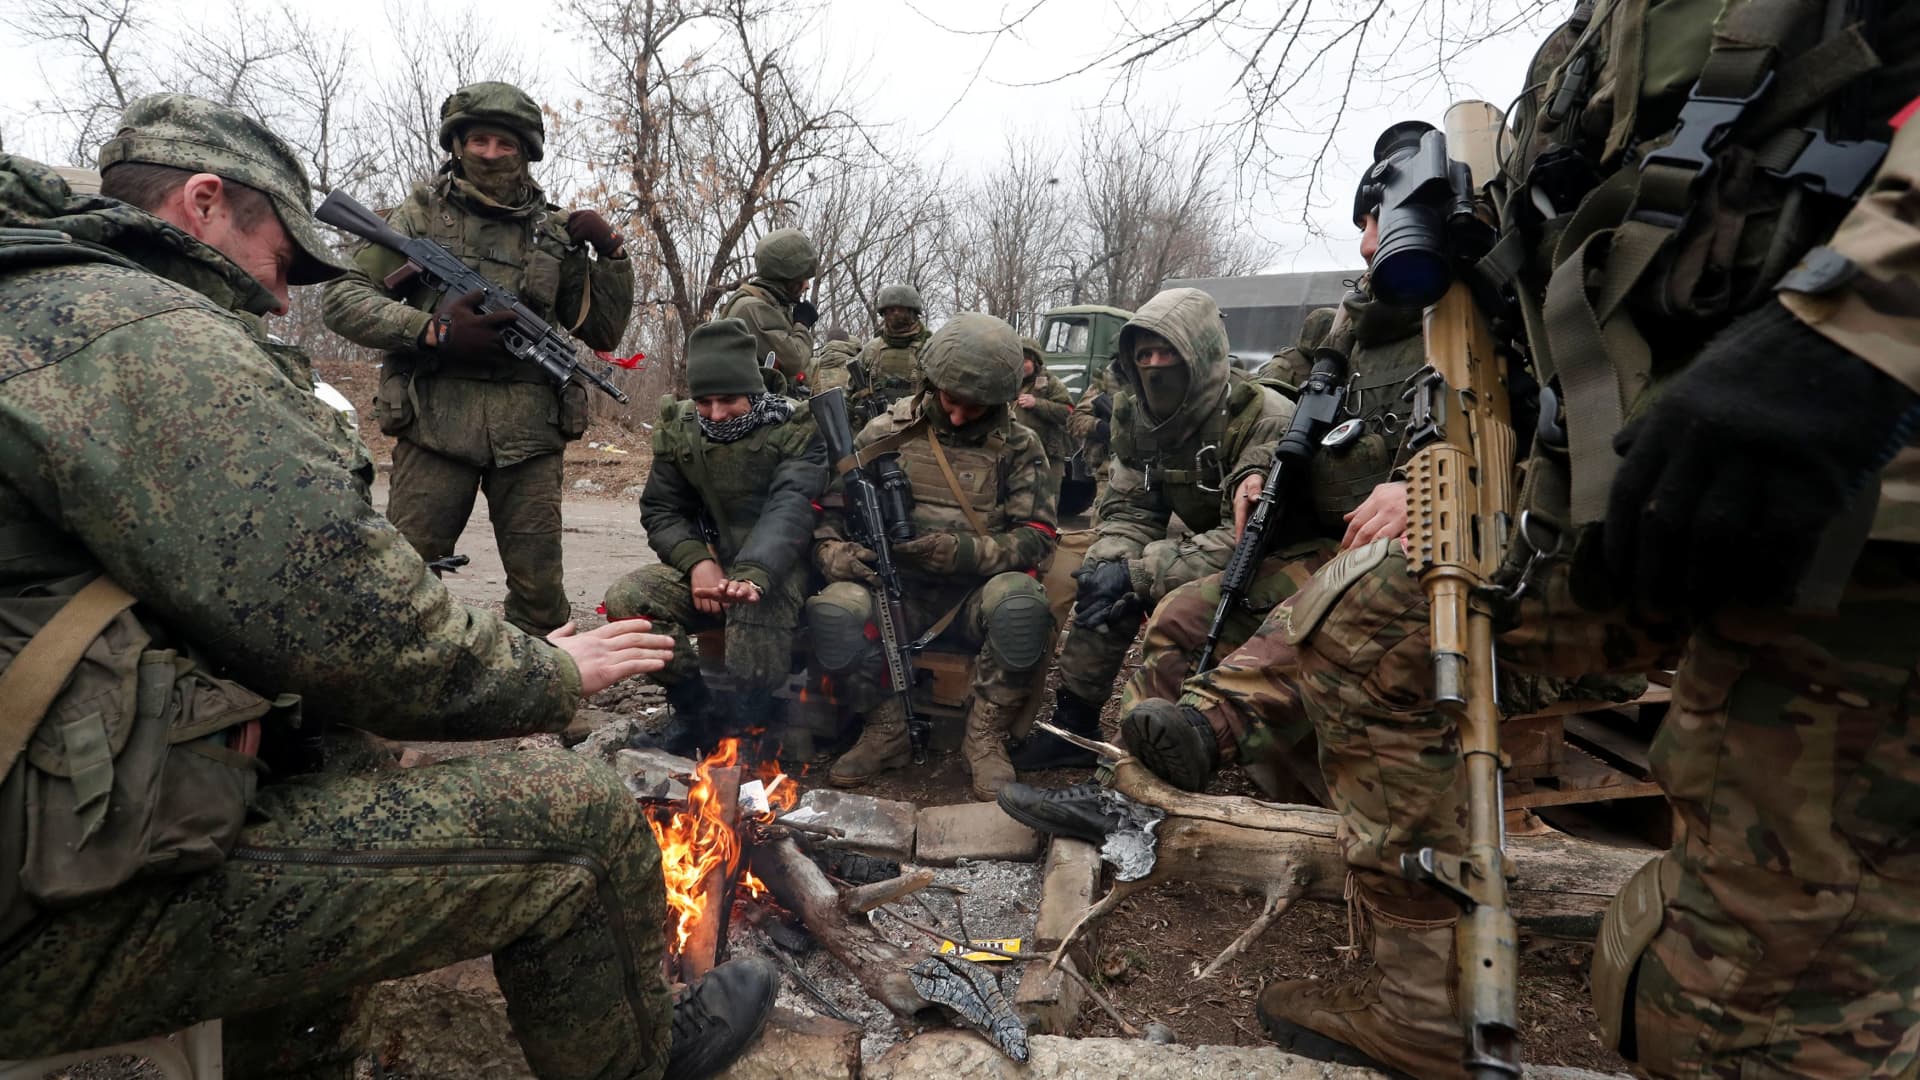 Service members of pro-Russian troops in uniforms without insignia gather around a fire in the separatist-controlled settlement of Mykolaivka (Nikolaevka), as Russia's invasion of Ukraine continues, in the Donetsk region, Ukraine March 1, 2022.